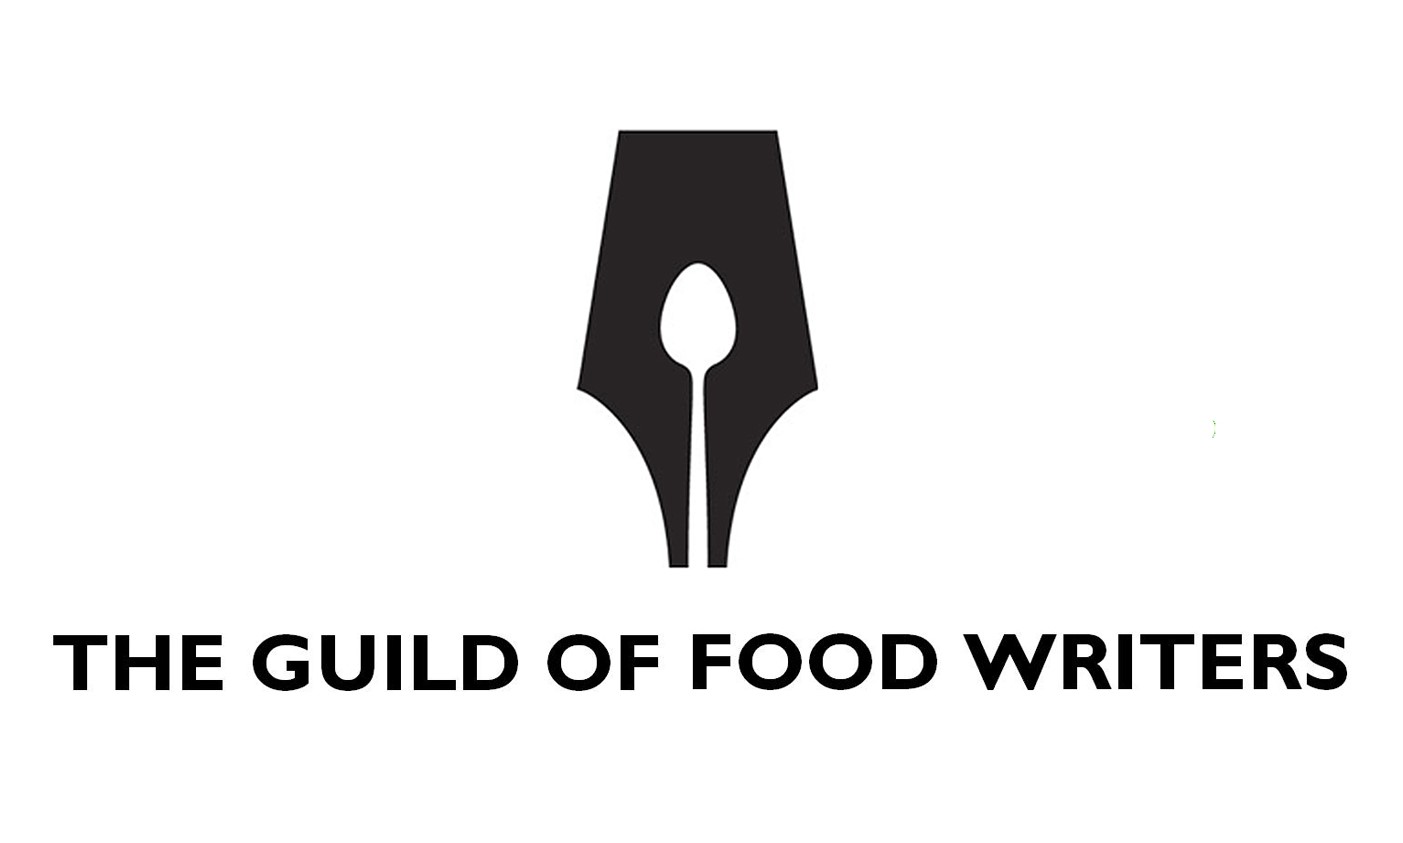 Negative-Space-logo_Guild-Food-Writers